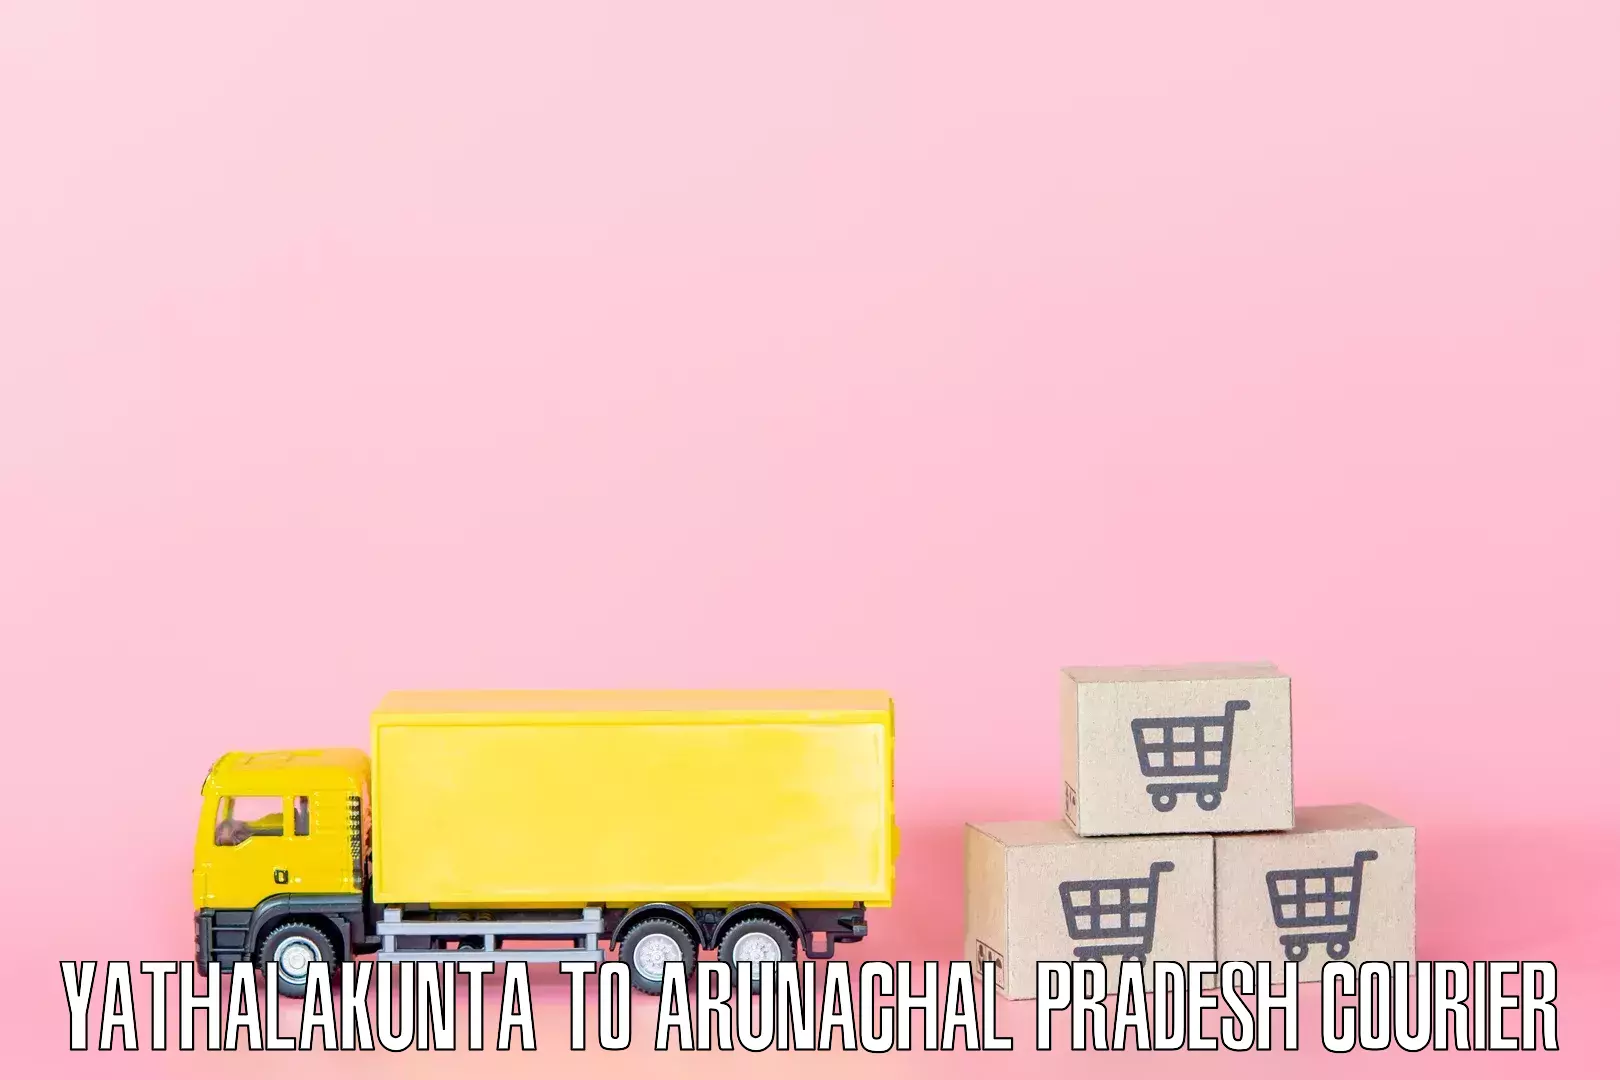 Efficient home goods movers Yathalakunta to Aalo